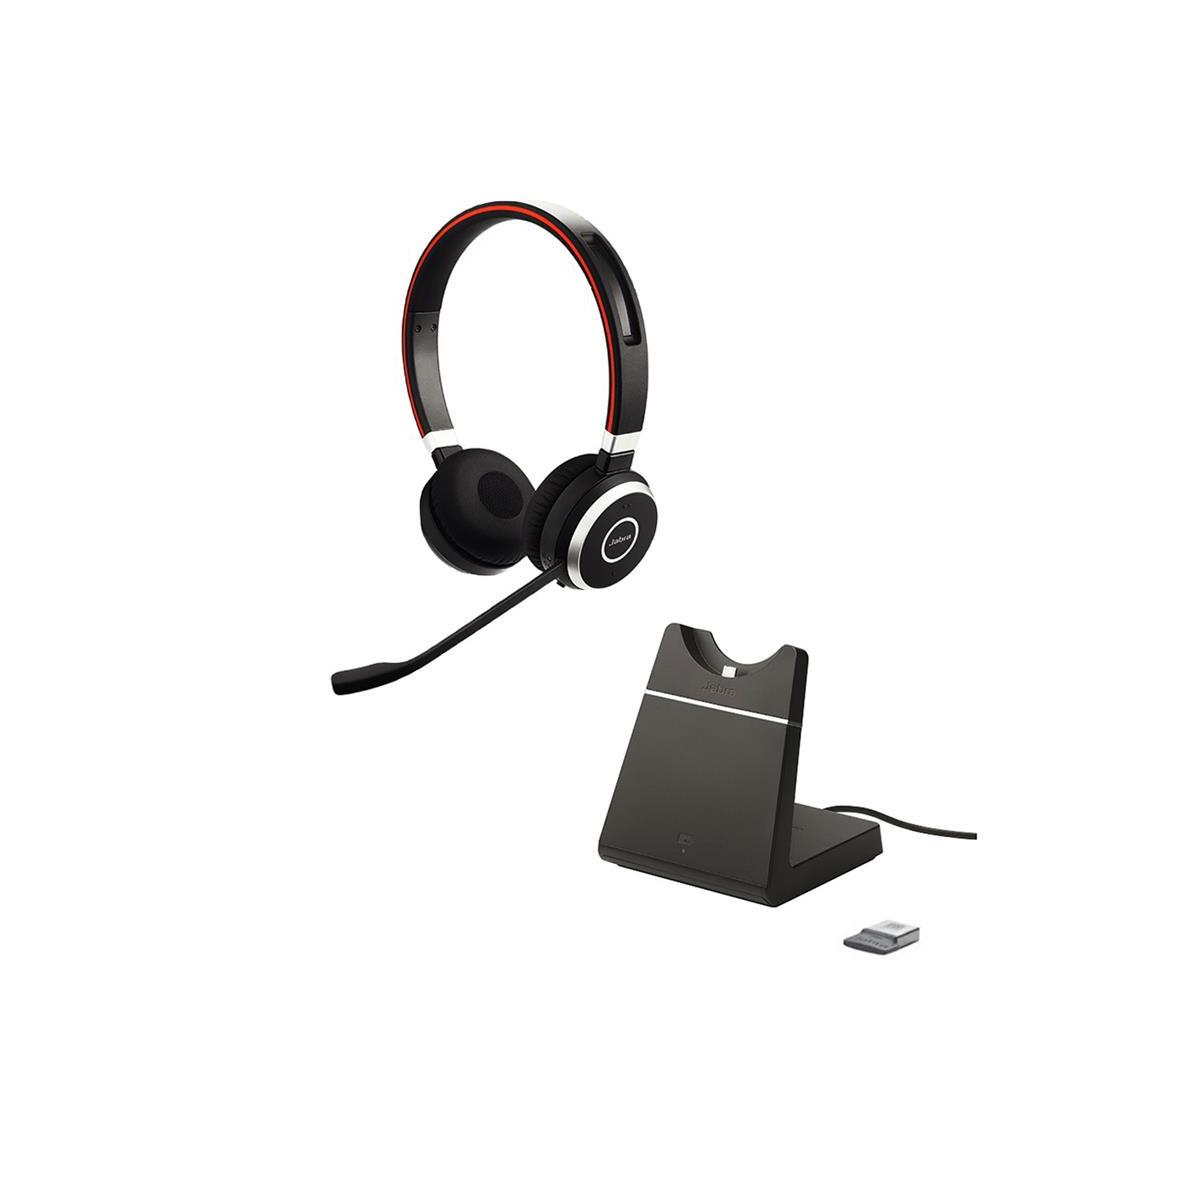 Image of Jabra Evolve 65 UC Stereo Bluetooth Headset with USB Adapter and Charging Stand